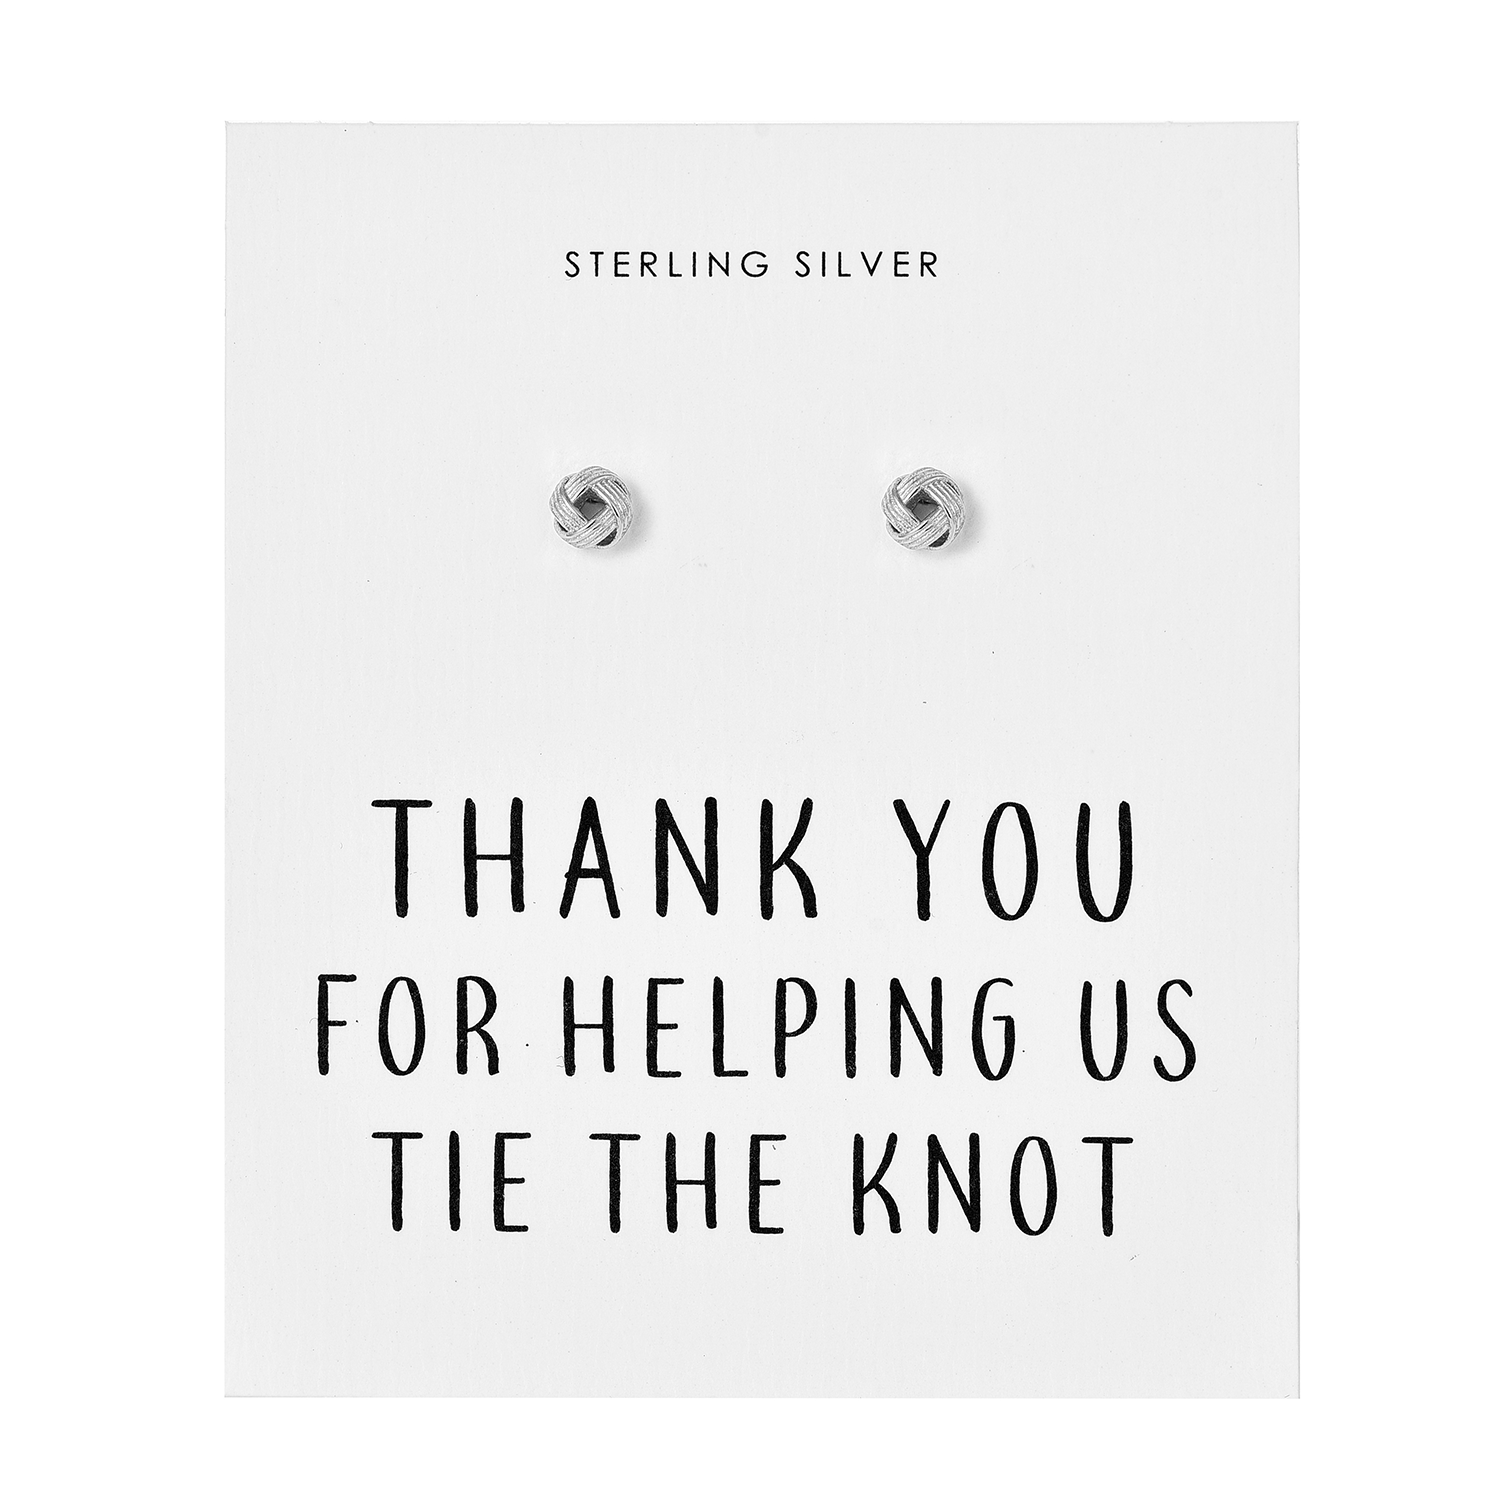 Sterling Silver Thank You for Helping us Tie The Knot Earrings by Philip Jones Jewellery